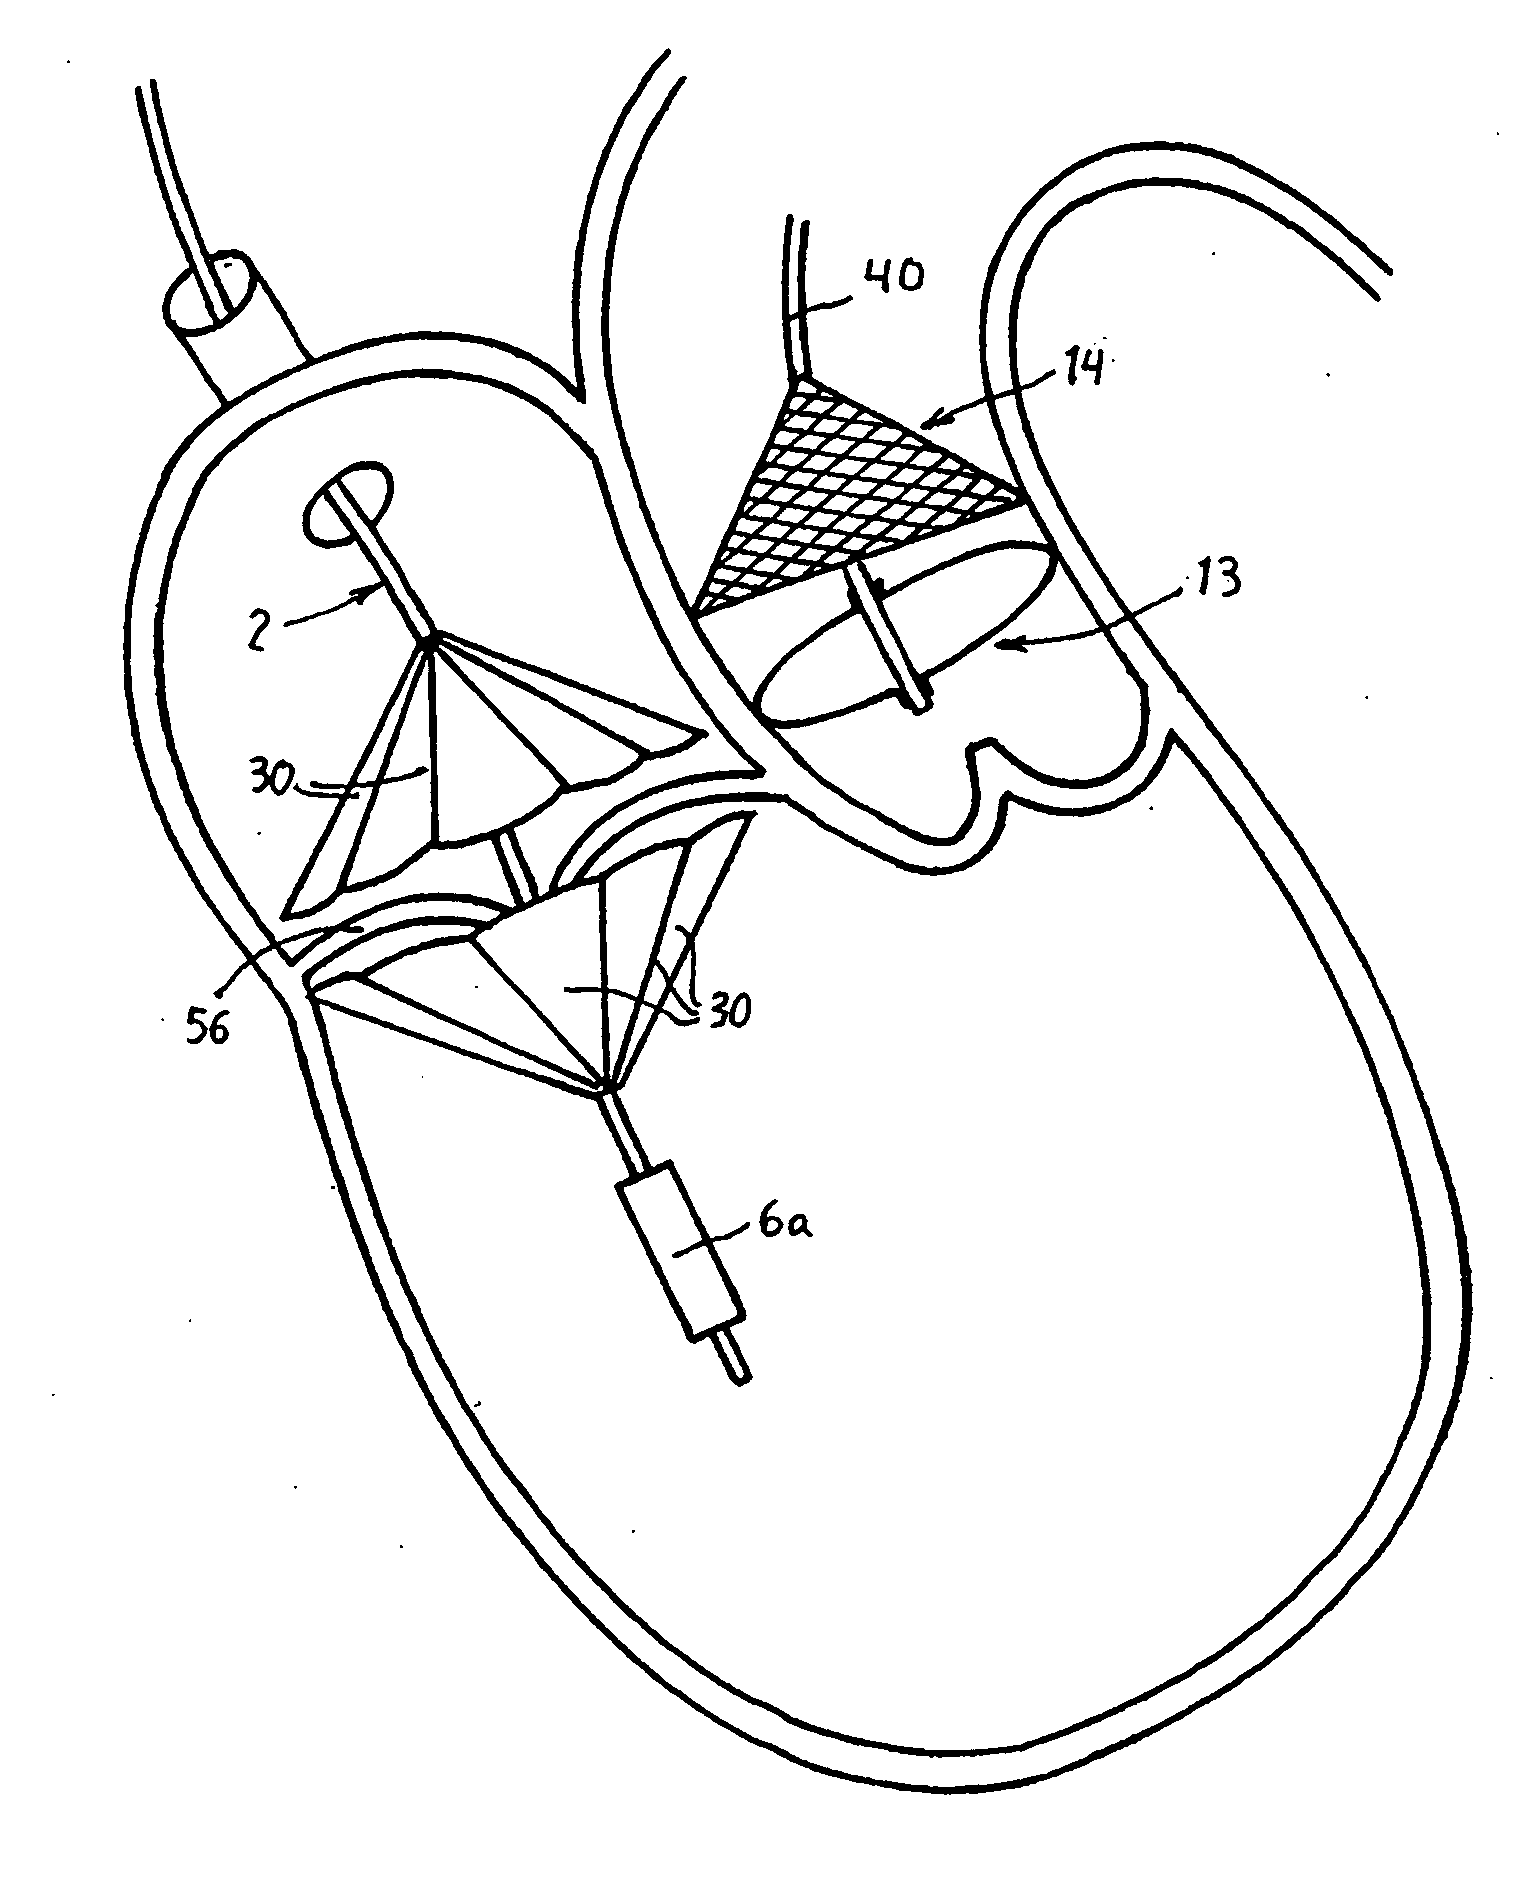 Prosthetic valve for transluminal delivery